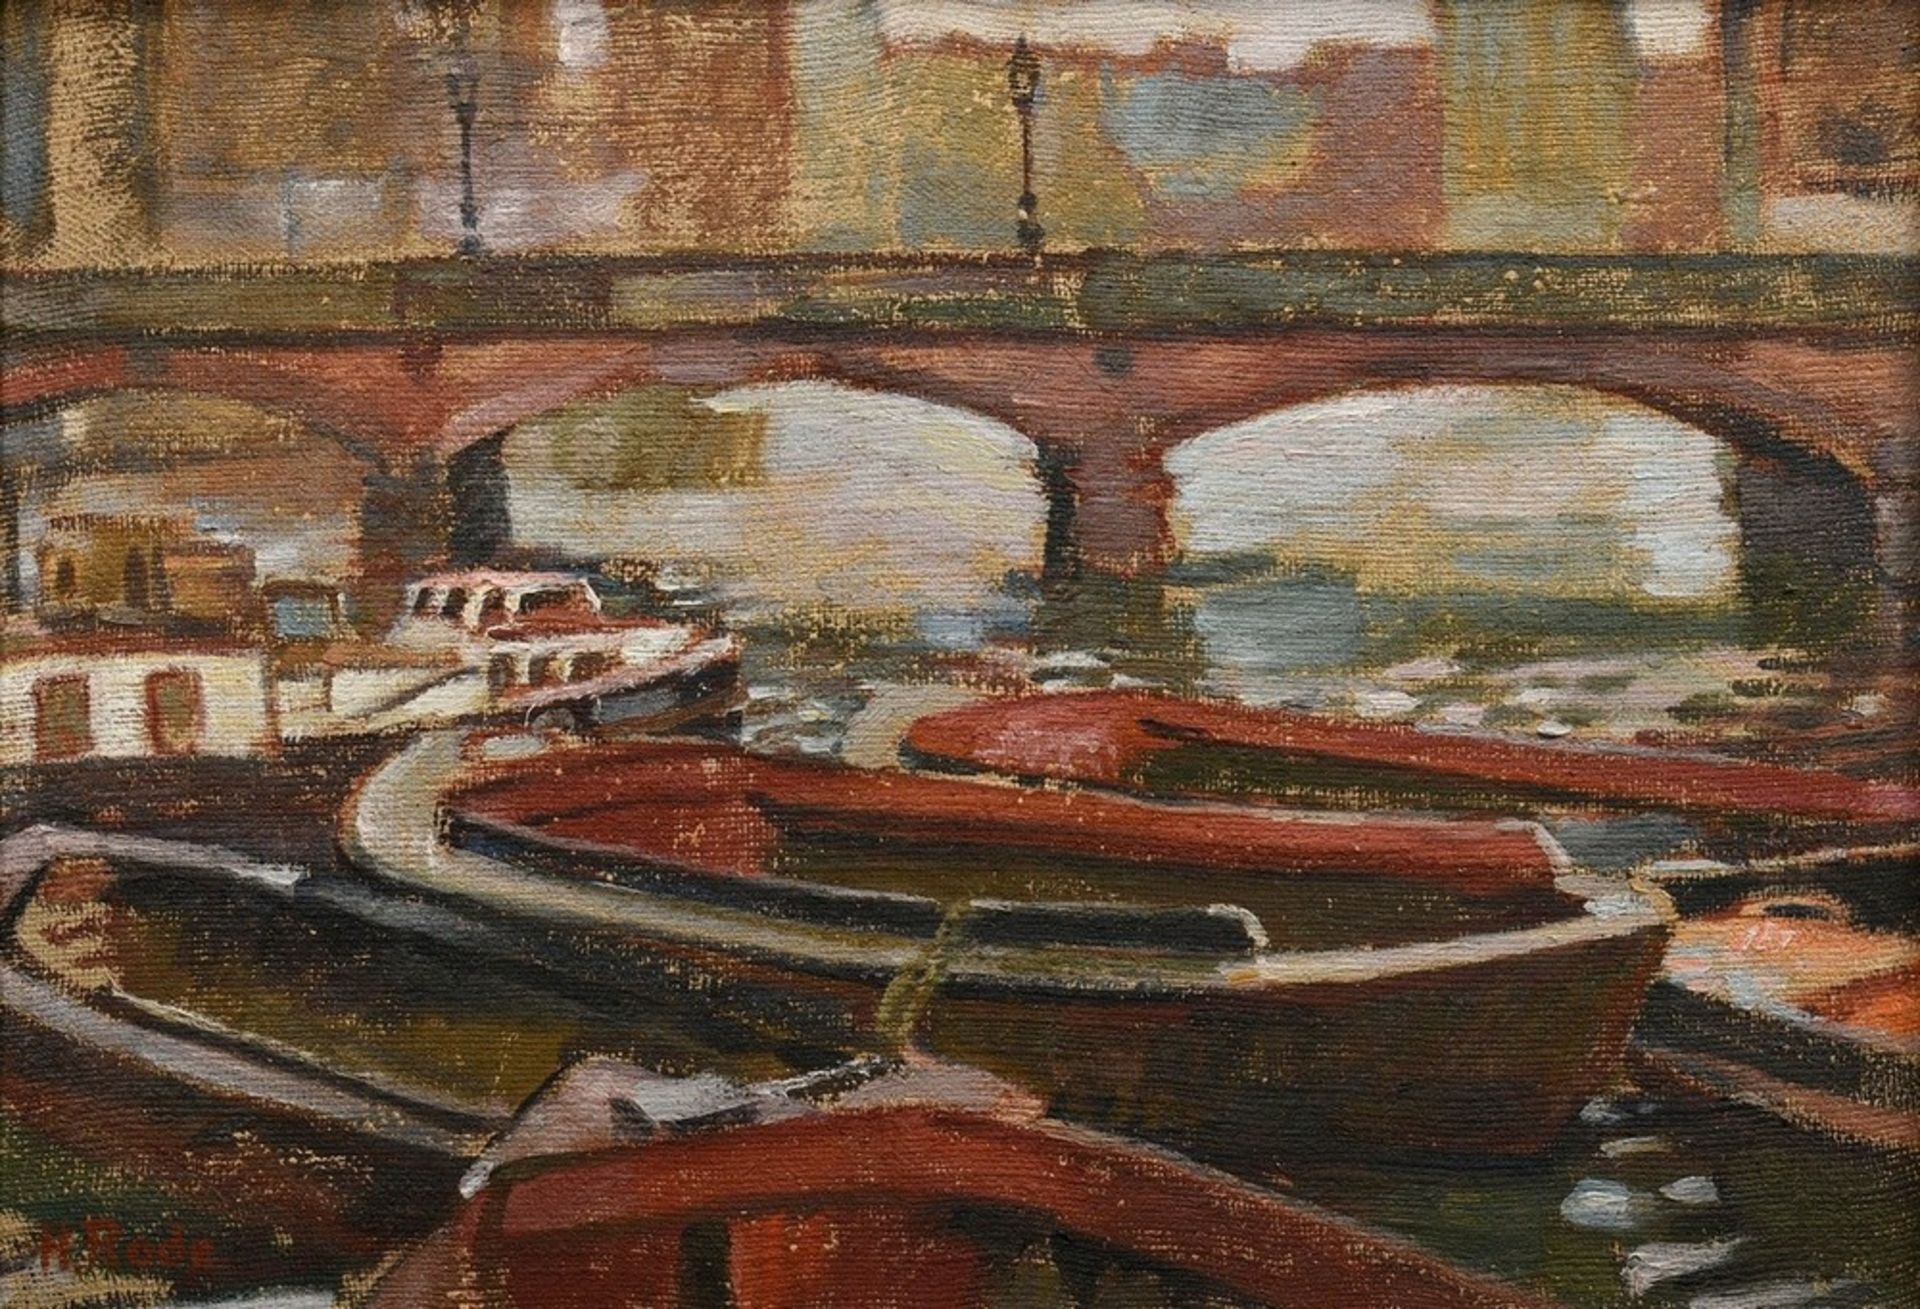 Rode, Heinrich (1906-1983) "Hamburg canal with bridge and barges", oil/canvas, sign. b.l., 35,7x50,